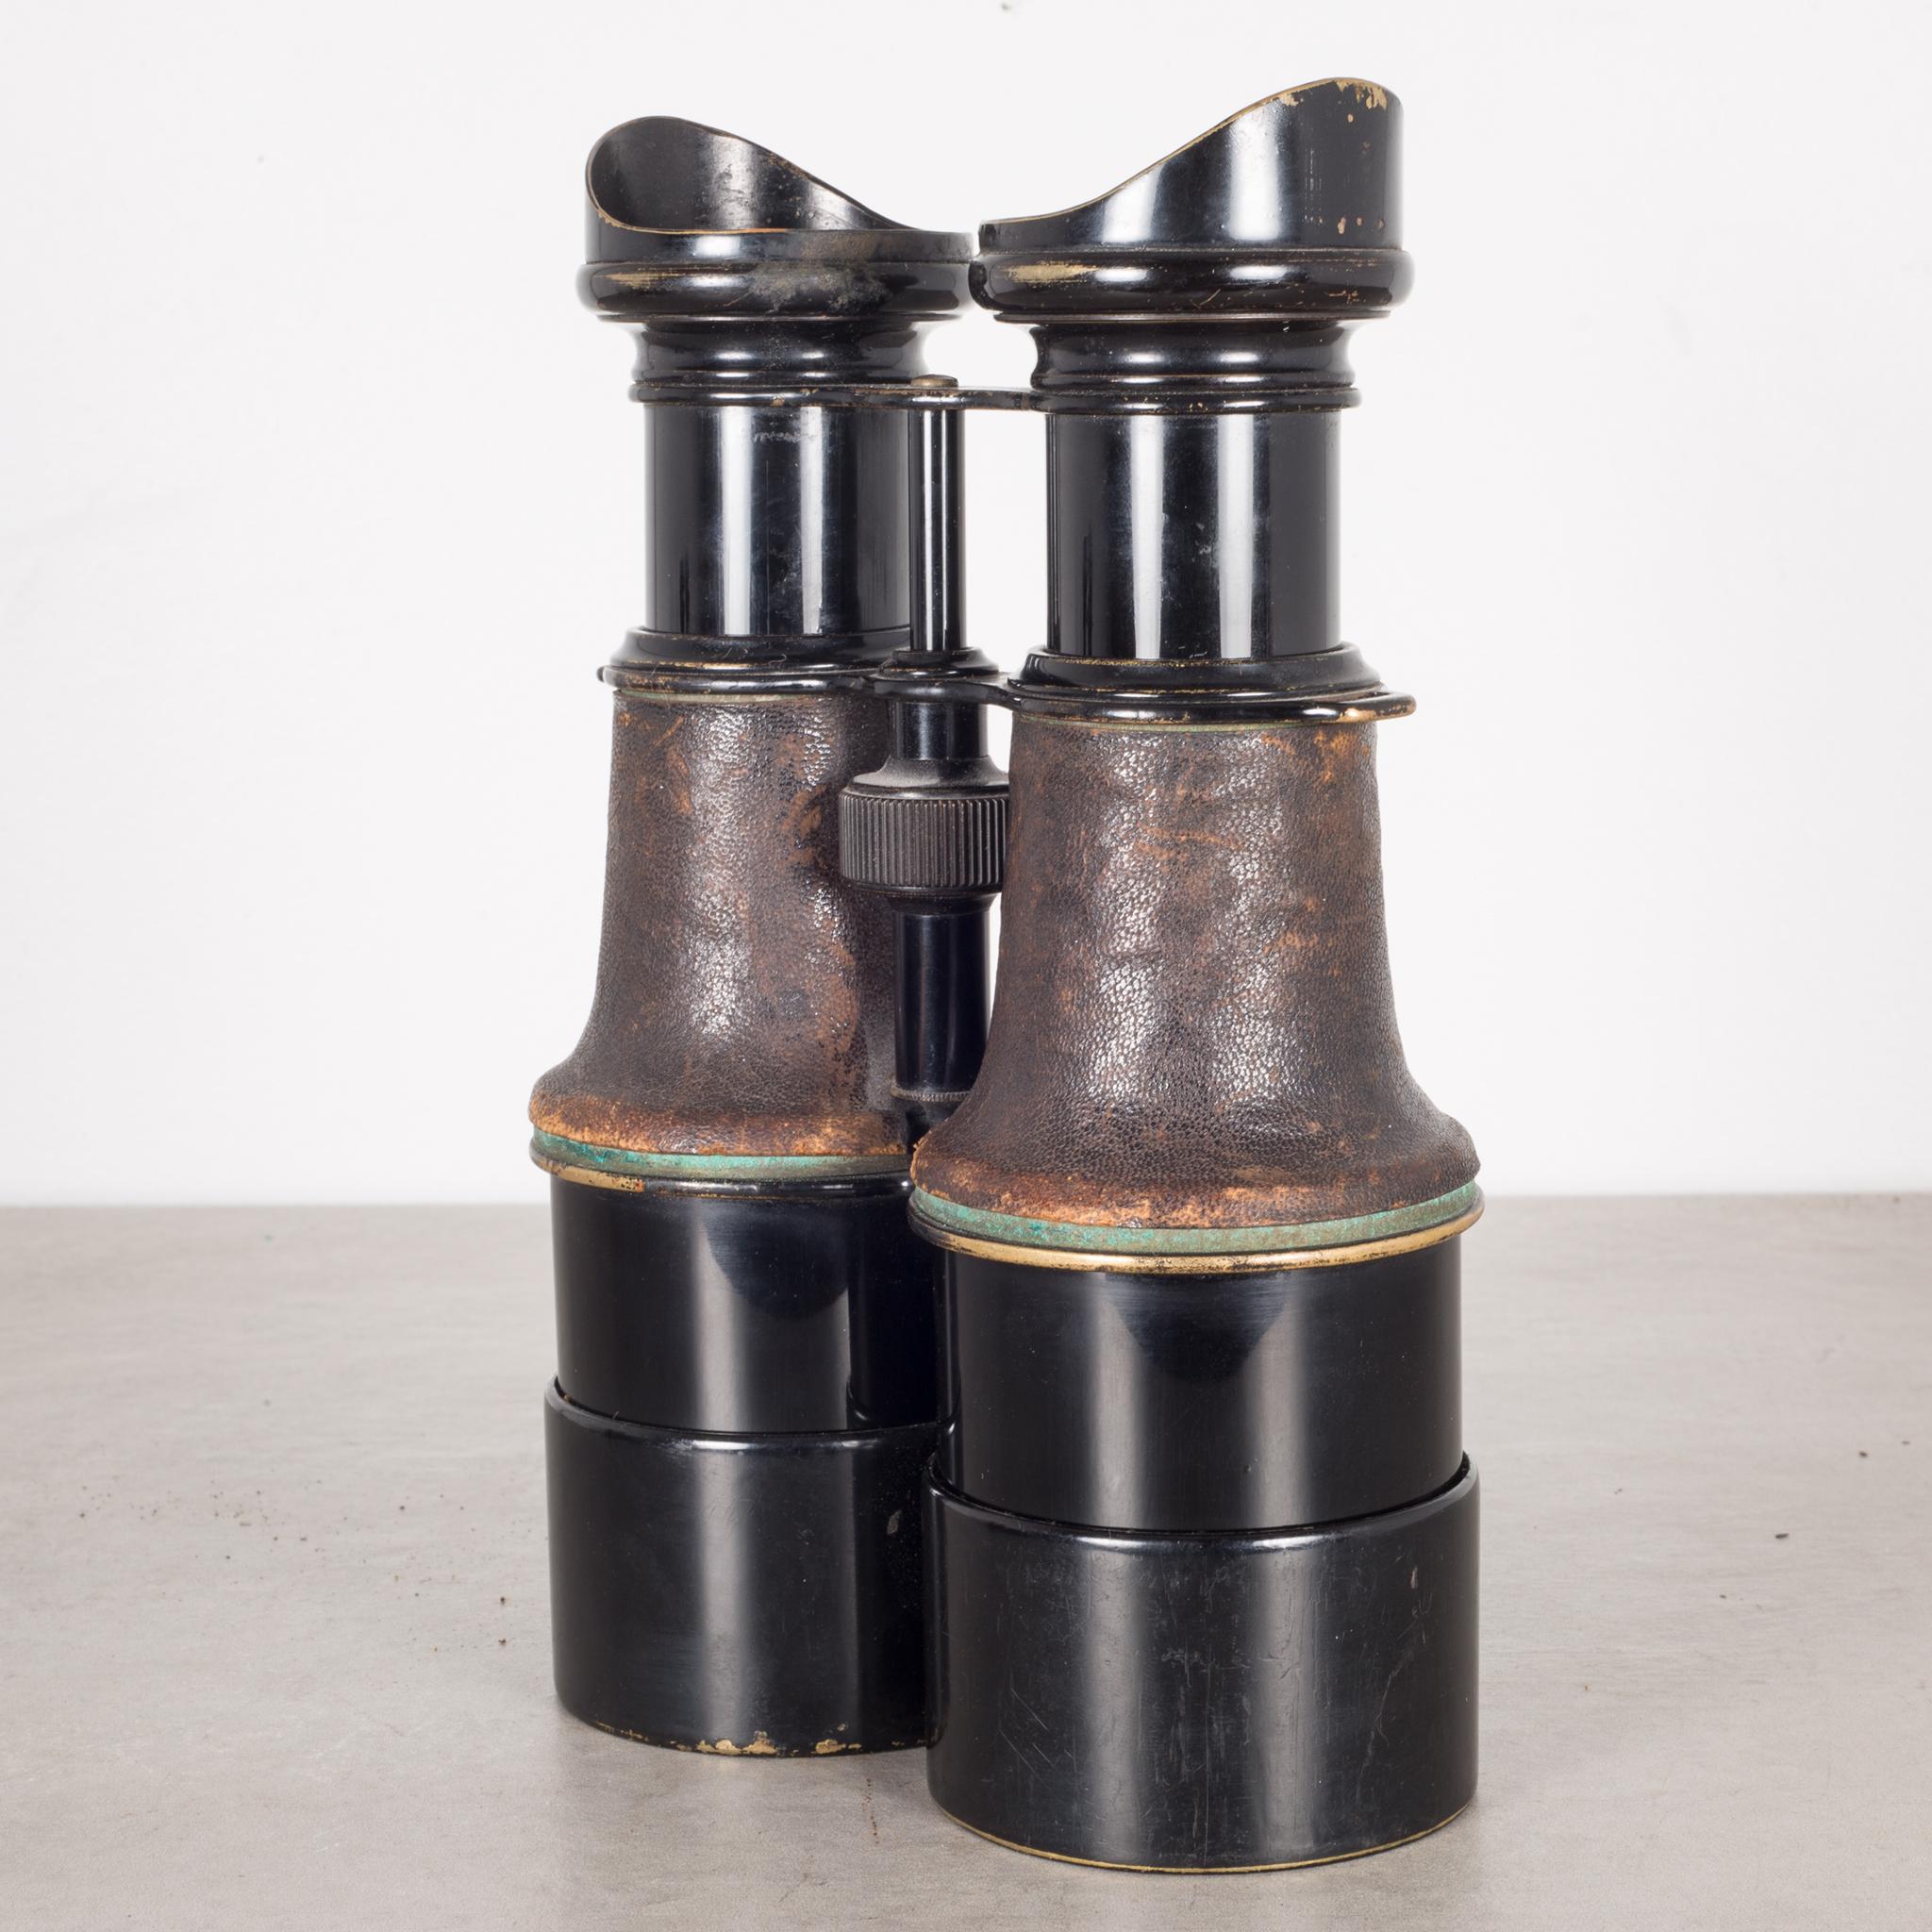 About

This is an original pair of leather wrapped maritime binoculars. 